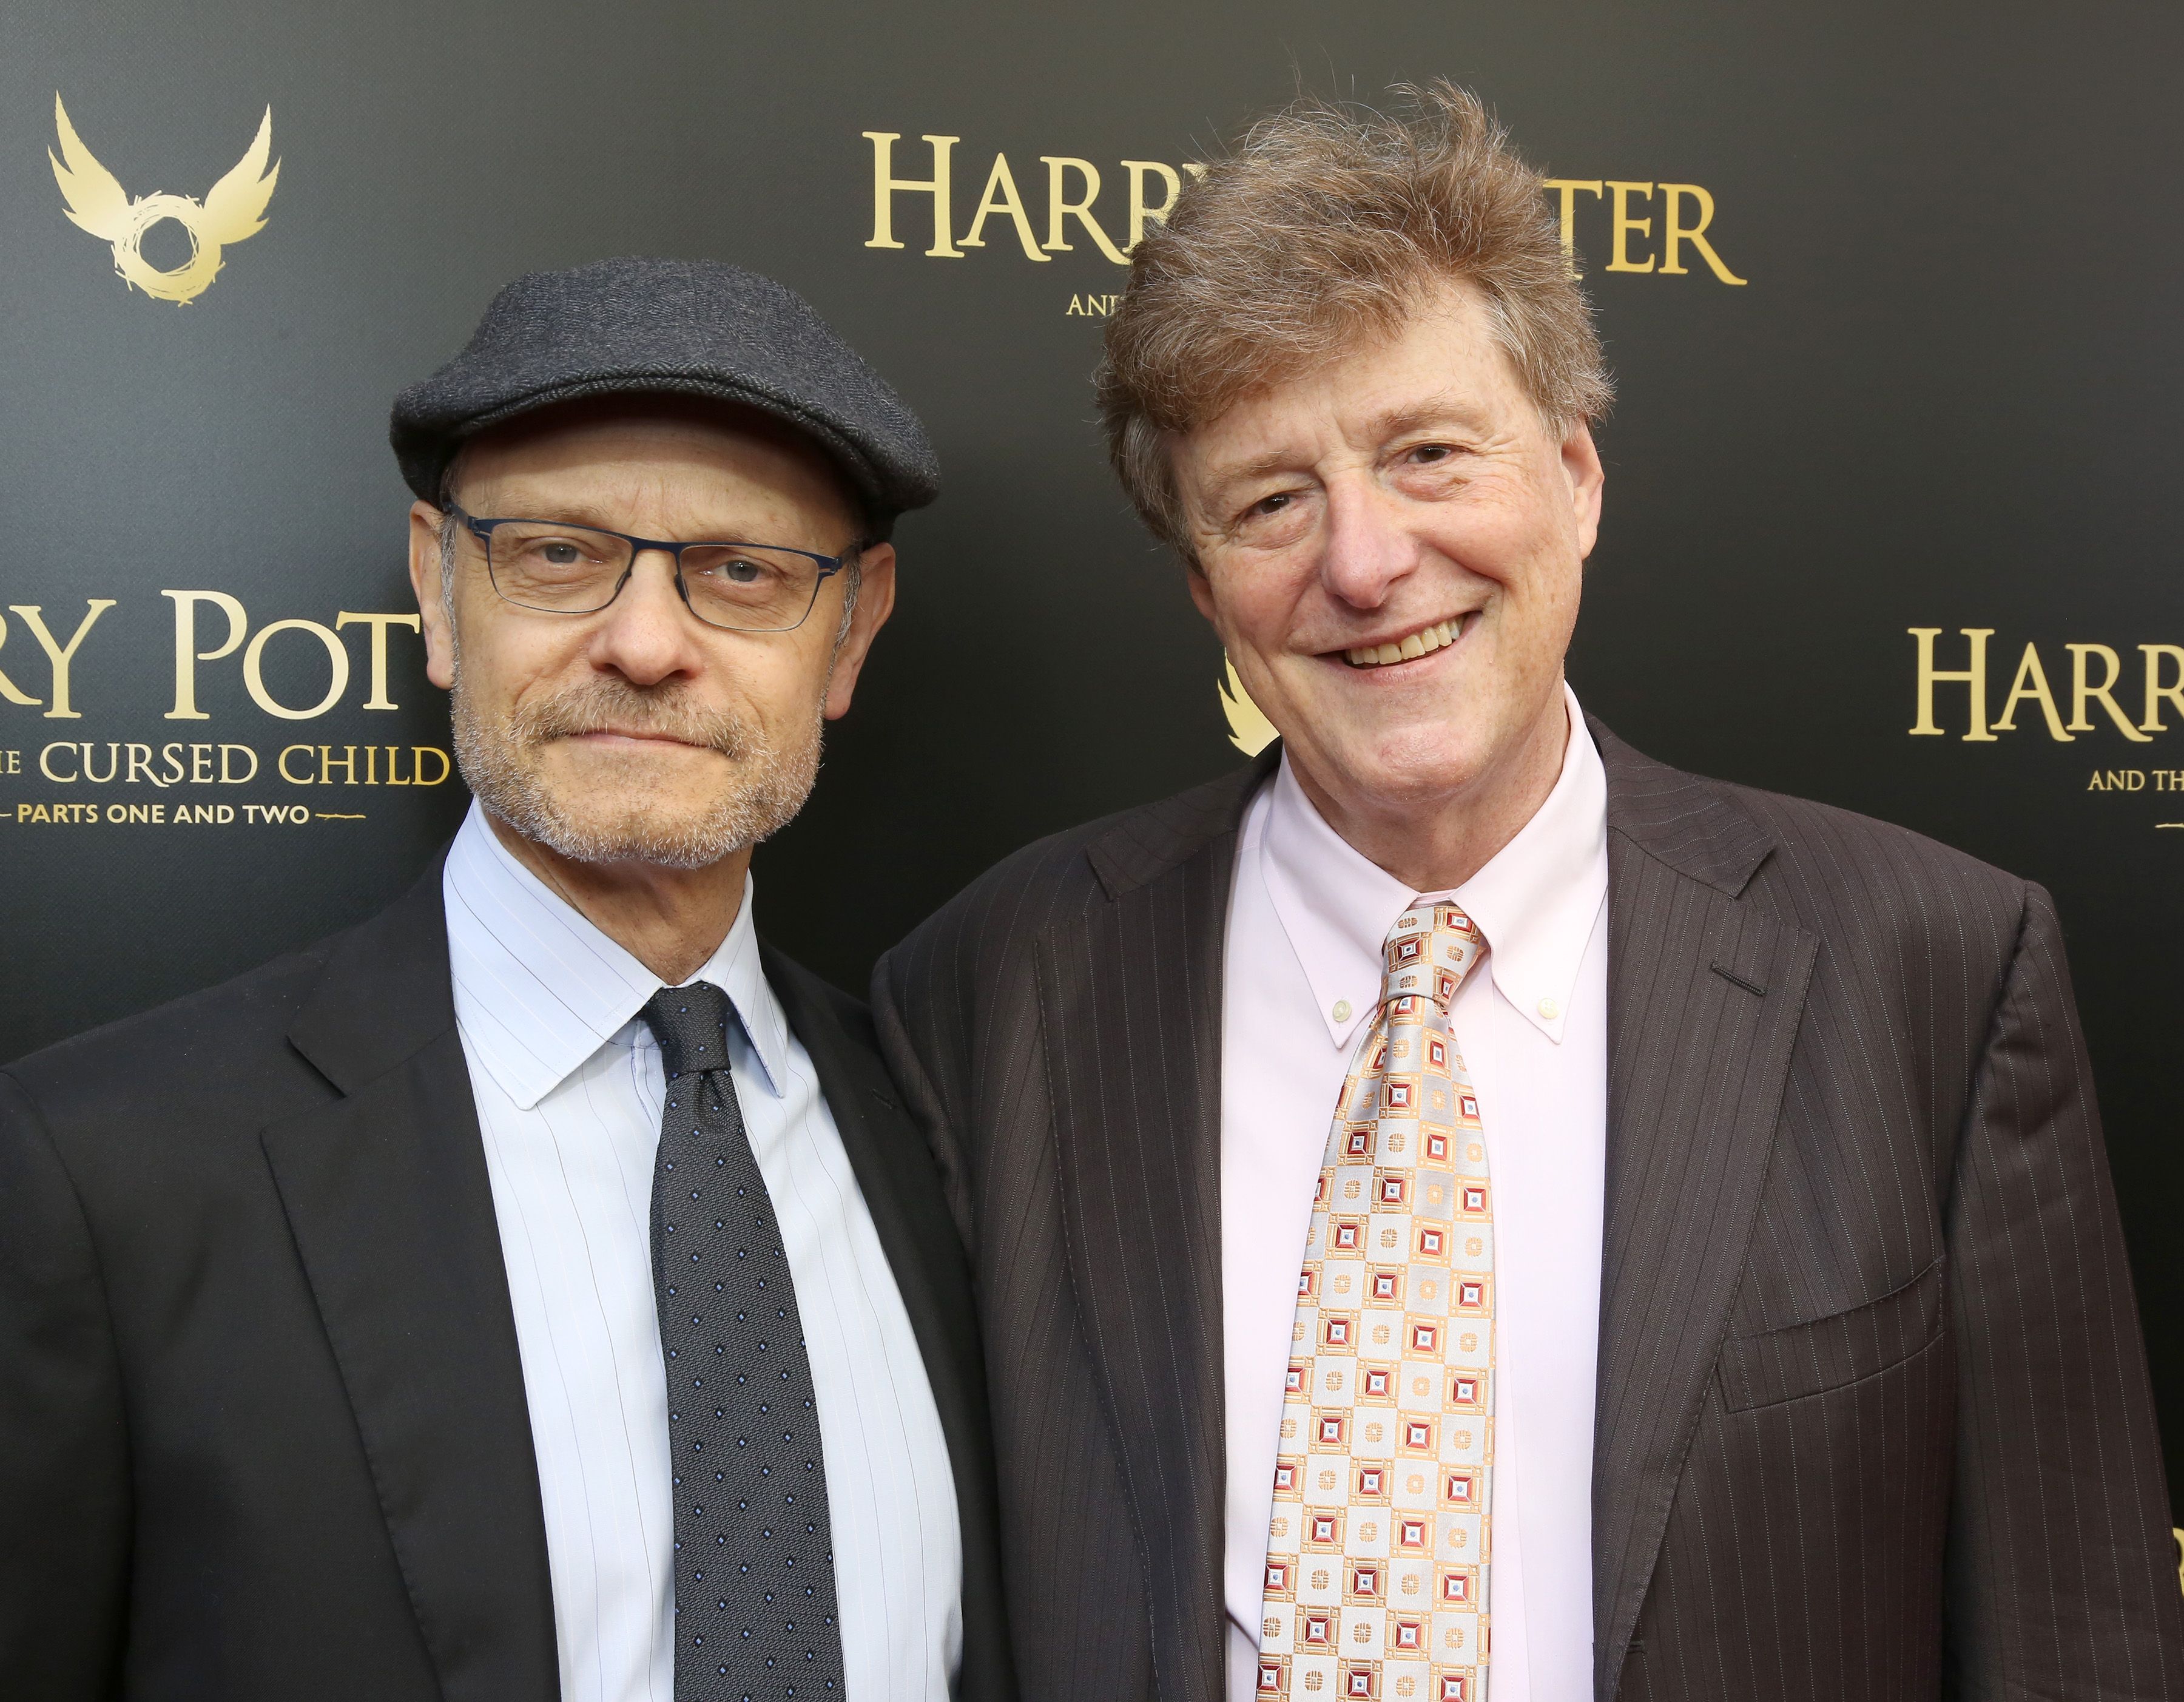 David Hyde Pierce and Brian Hargrove during the Broadway Opening Day performance of "Harry Potter and the Cursed Child Parts One and Two" at The Lyric Theatre on April 22, 2018 in New York City. | Source: Getty Images